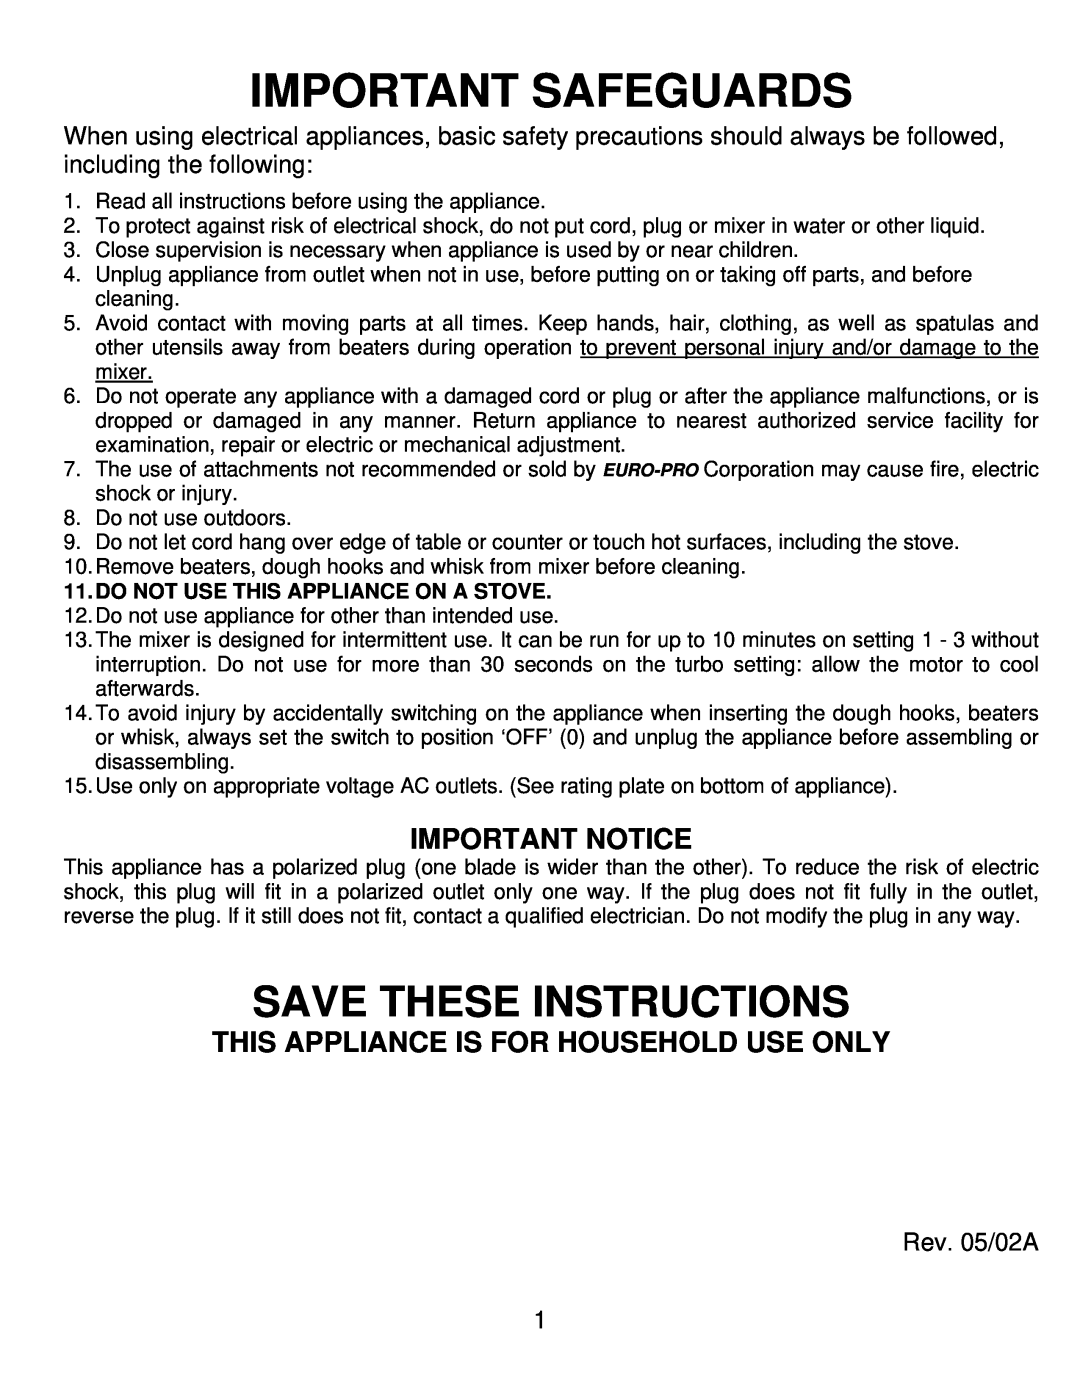 Bravetti FP201 Important Safeguards, Save These Instructions, Important Notice, This Appliance Is For Household Use Only 